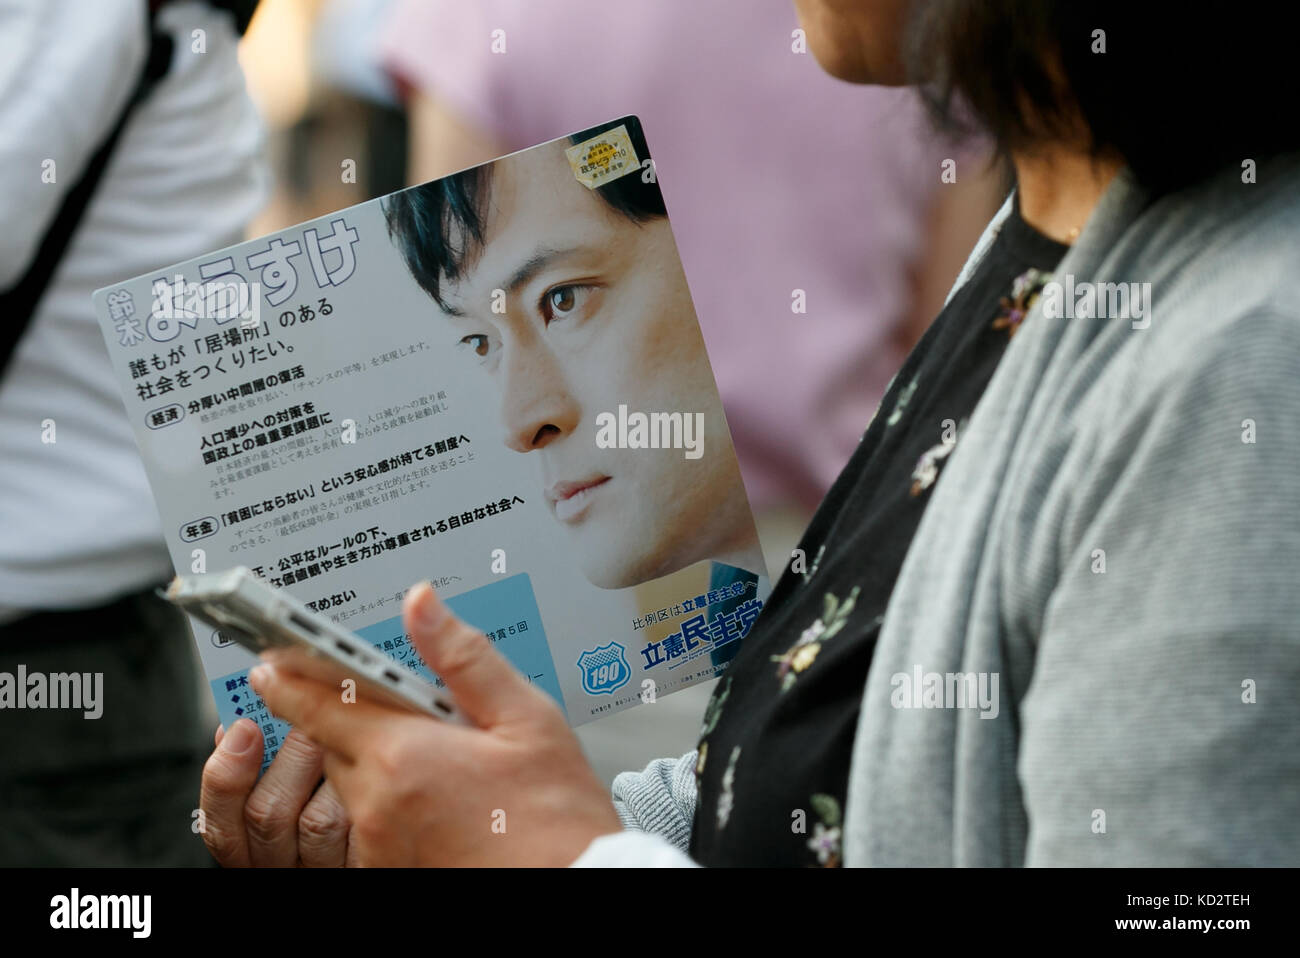 Tokyo, Japan. 10th Oct, 2017. A woman holds propaganda from the Constitutional Democratic Party of Japan outside Ikebukuro Station on October 10, 2017, Tokyo, Japan. Edano, head of the newly created Constitutional Democratic Party (CDP) attended a campaign event to support his party's candidate Yosuke Suzuki. Campaigning officially started on October 10 for the October 22 election. Credit: Rodrigo Reyes Marin/AFLO/Alamy Live News Stock Photo